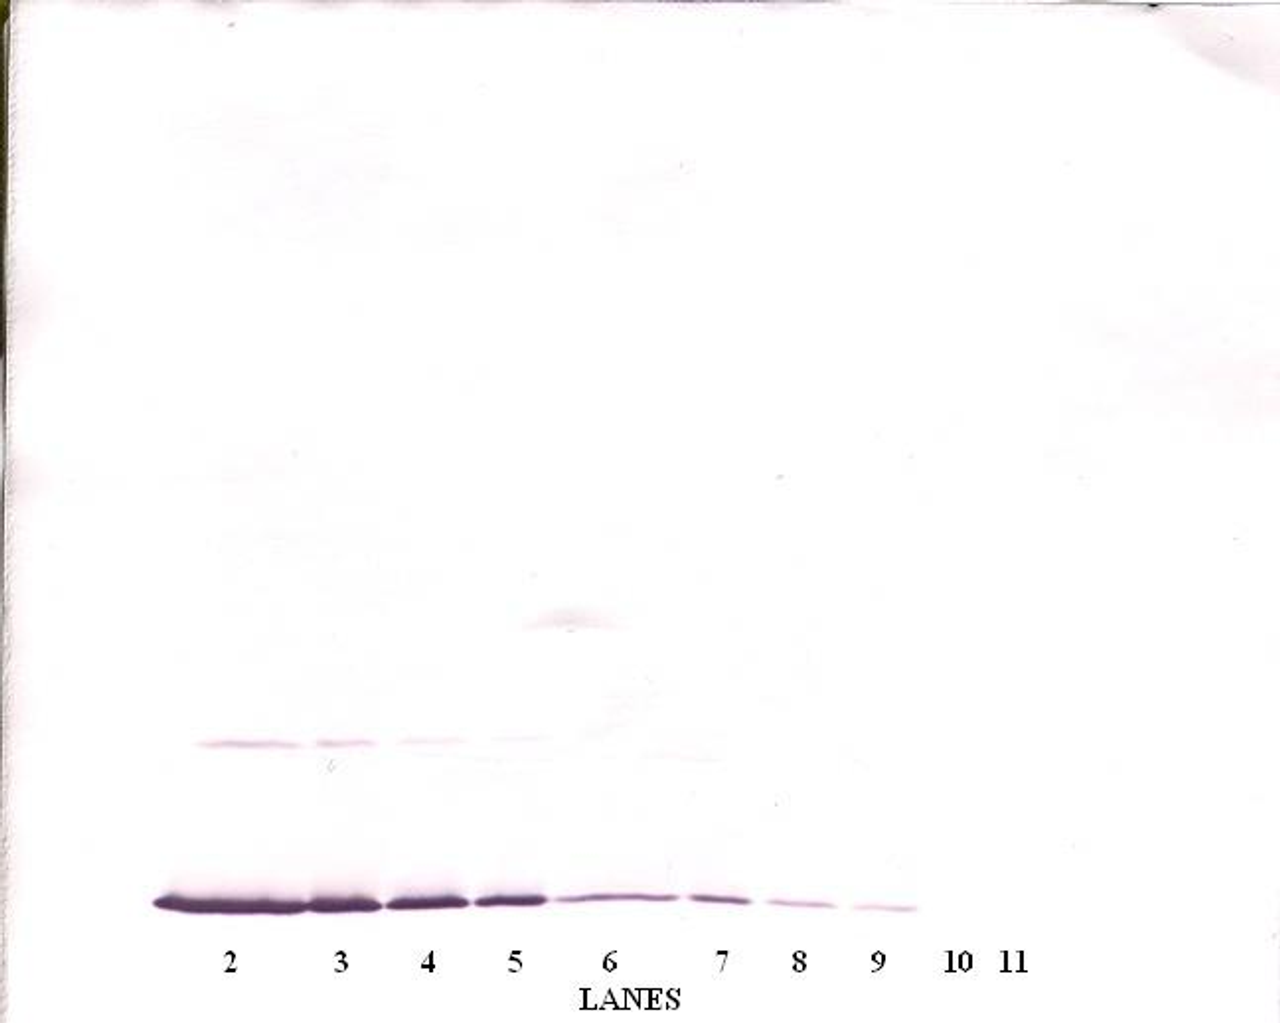 To detect Rat IFN-gamma by Western Blot analysis this antibody can be used at a concentration of 0.1-0.2 ug/ml. When used in conjunction with compatible secondary reagents, the detection limit for recombinant Rat IFN-gamma is 1.5-3.0 ng/lane, under either reducing or non-reducing conditions.